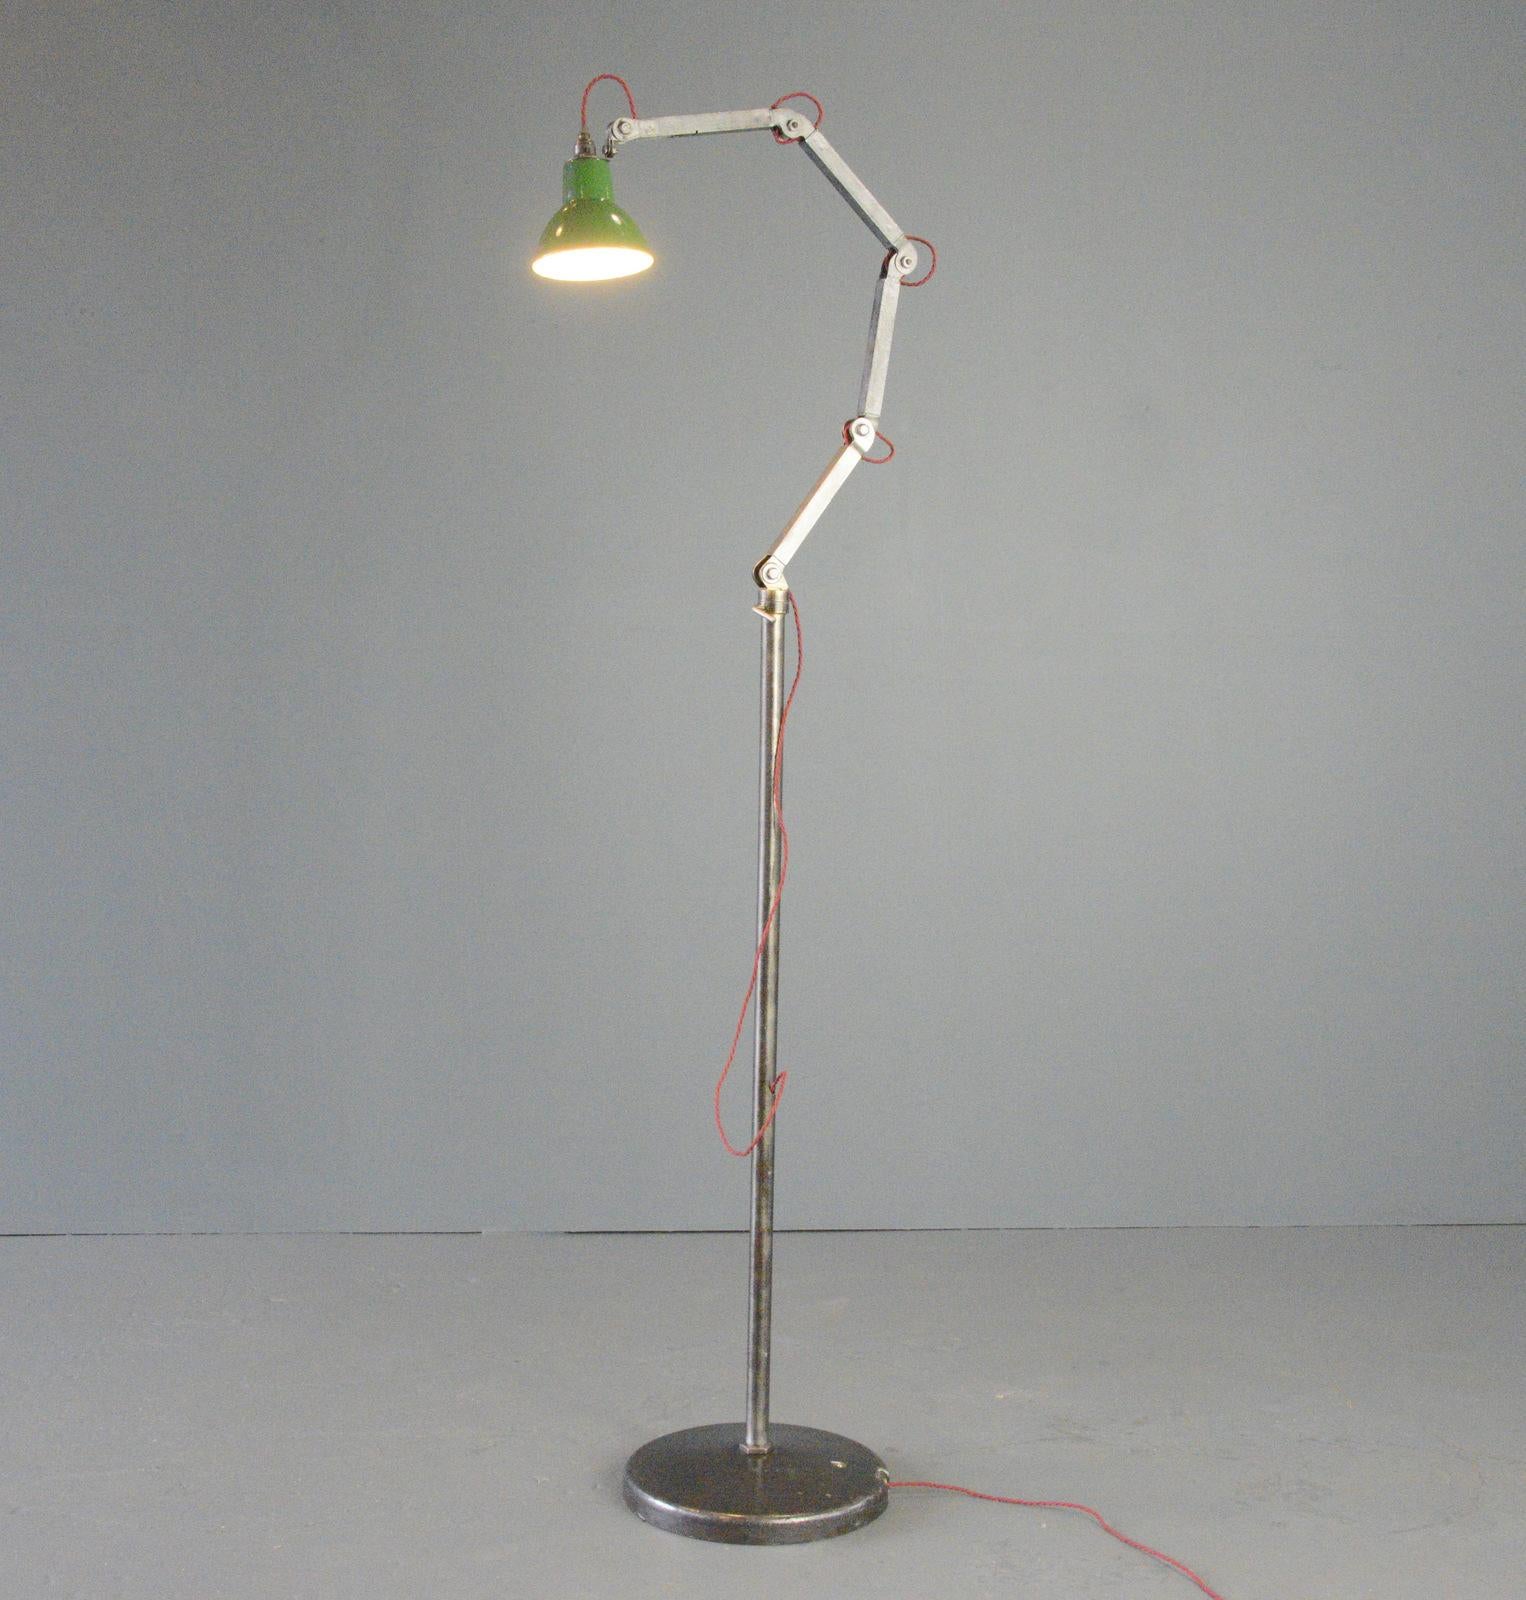 Floor Standing Industrial Inspection Lamp By EDL Circa 1930s

- Cast iron base
- 4 Articulated steel arms
- Green enamel shade
- Takes B22 bulbs
- On/Off on the shade
- Made by EDL 
- English ~ 1930s
- 90cm wide
- Extends up to 250cm tall
- Shade